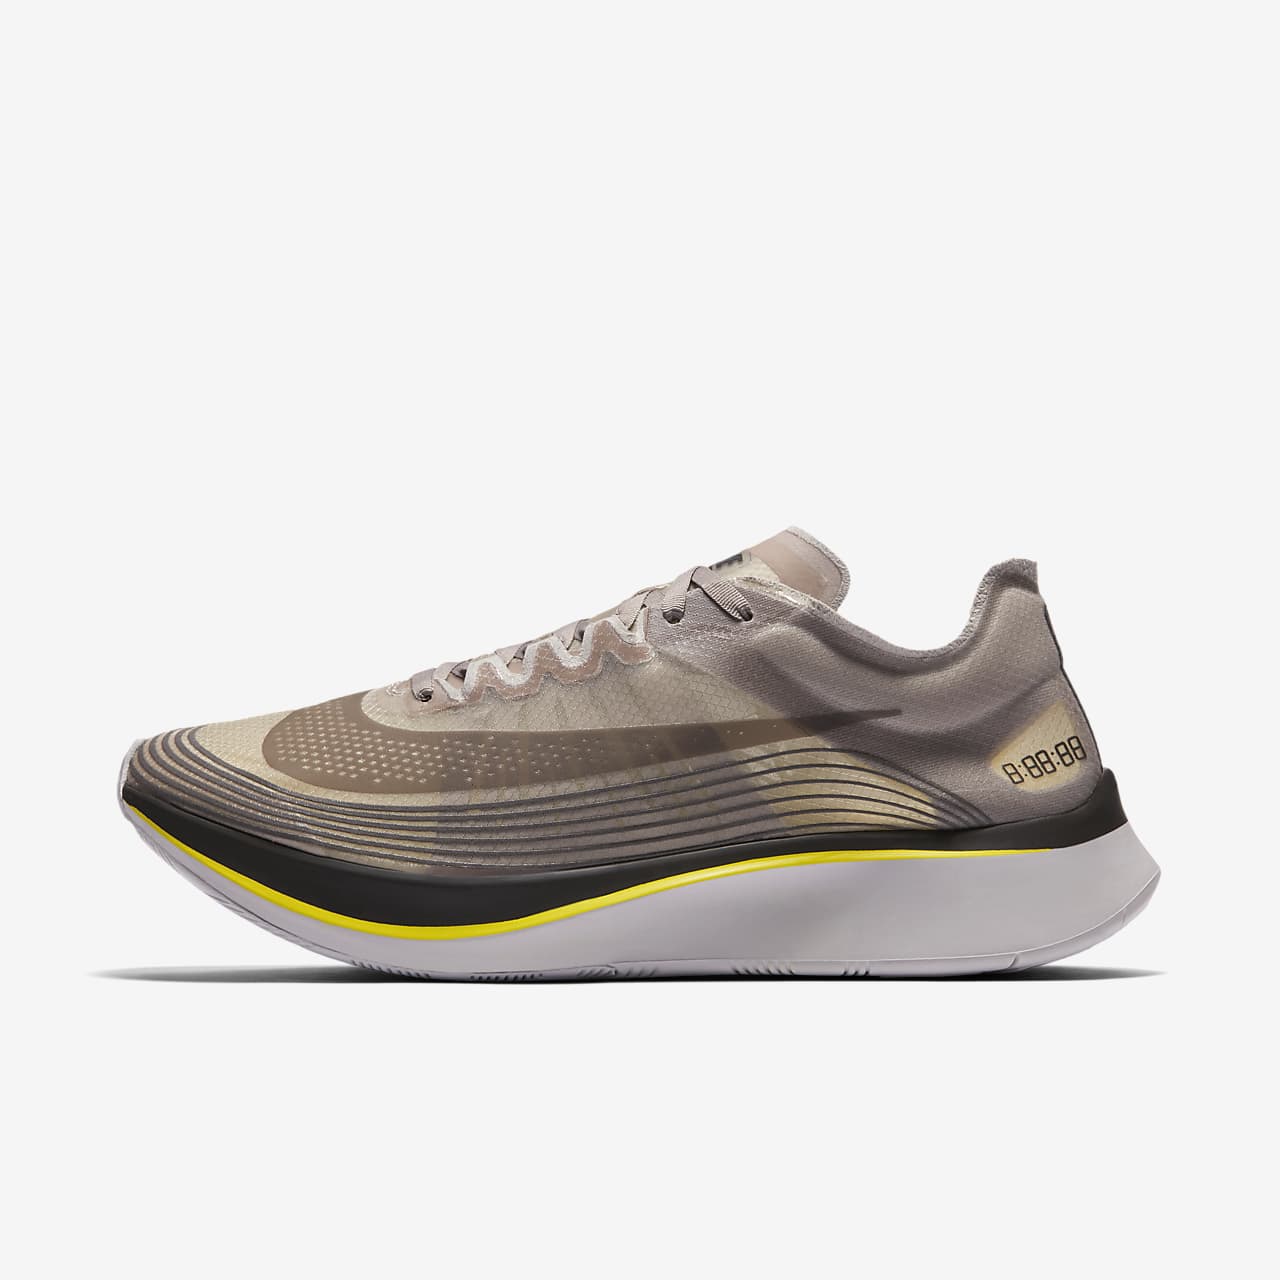 Chaussure de running mixte Nike Zoom Fly SP